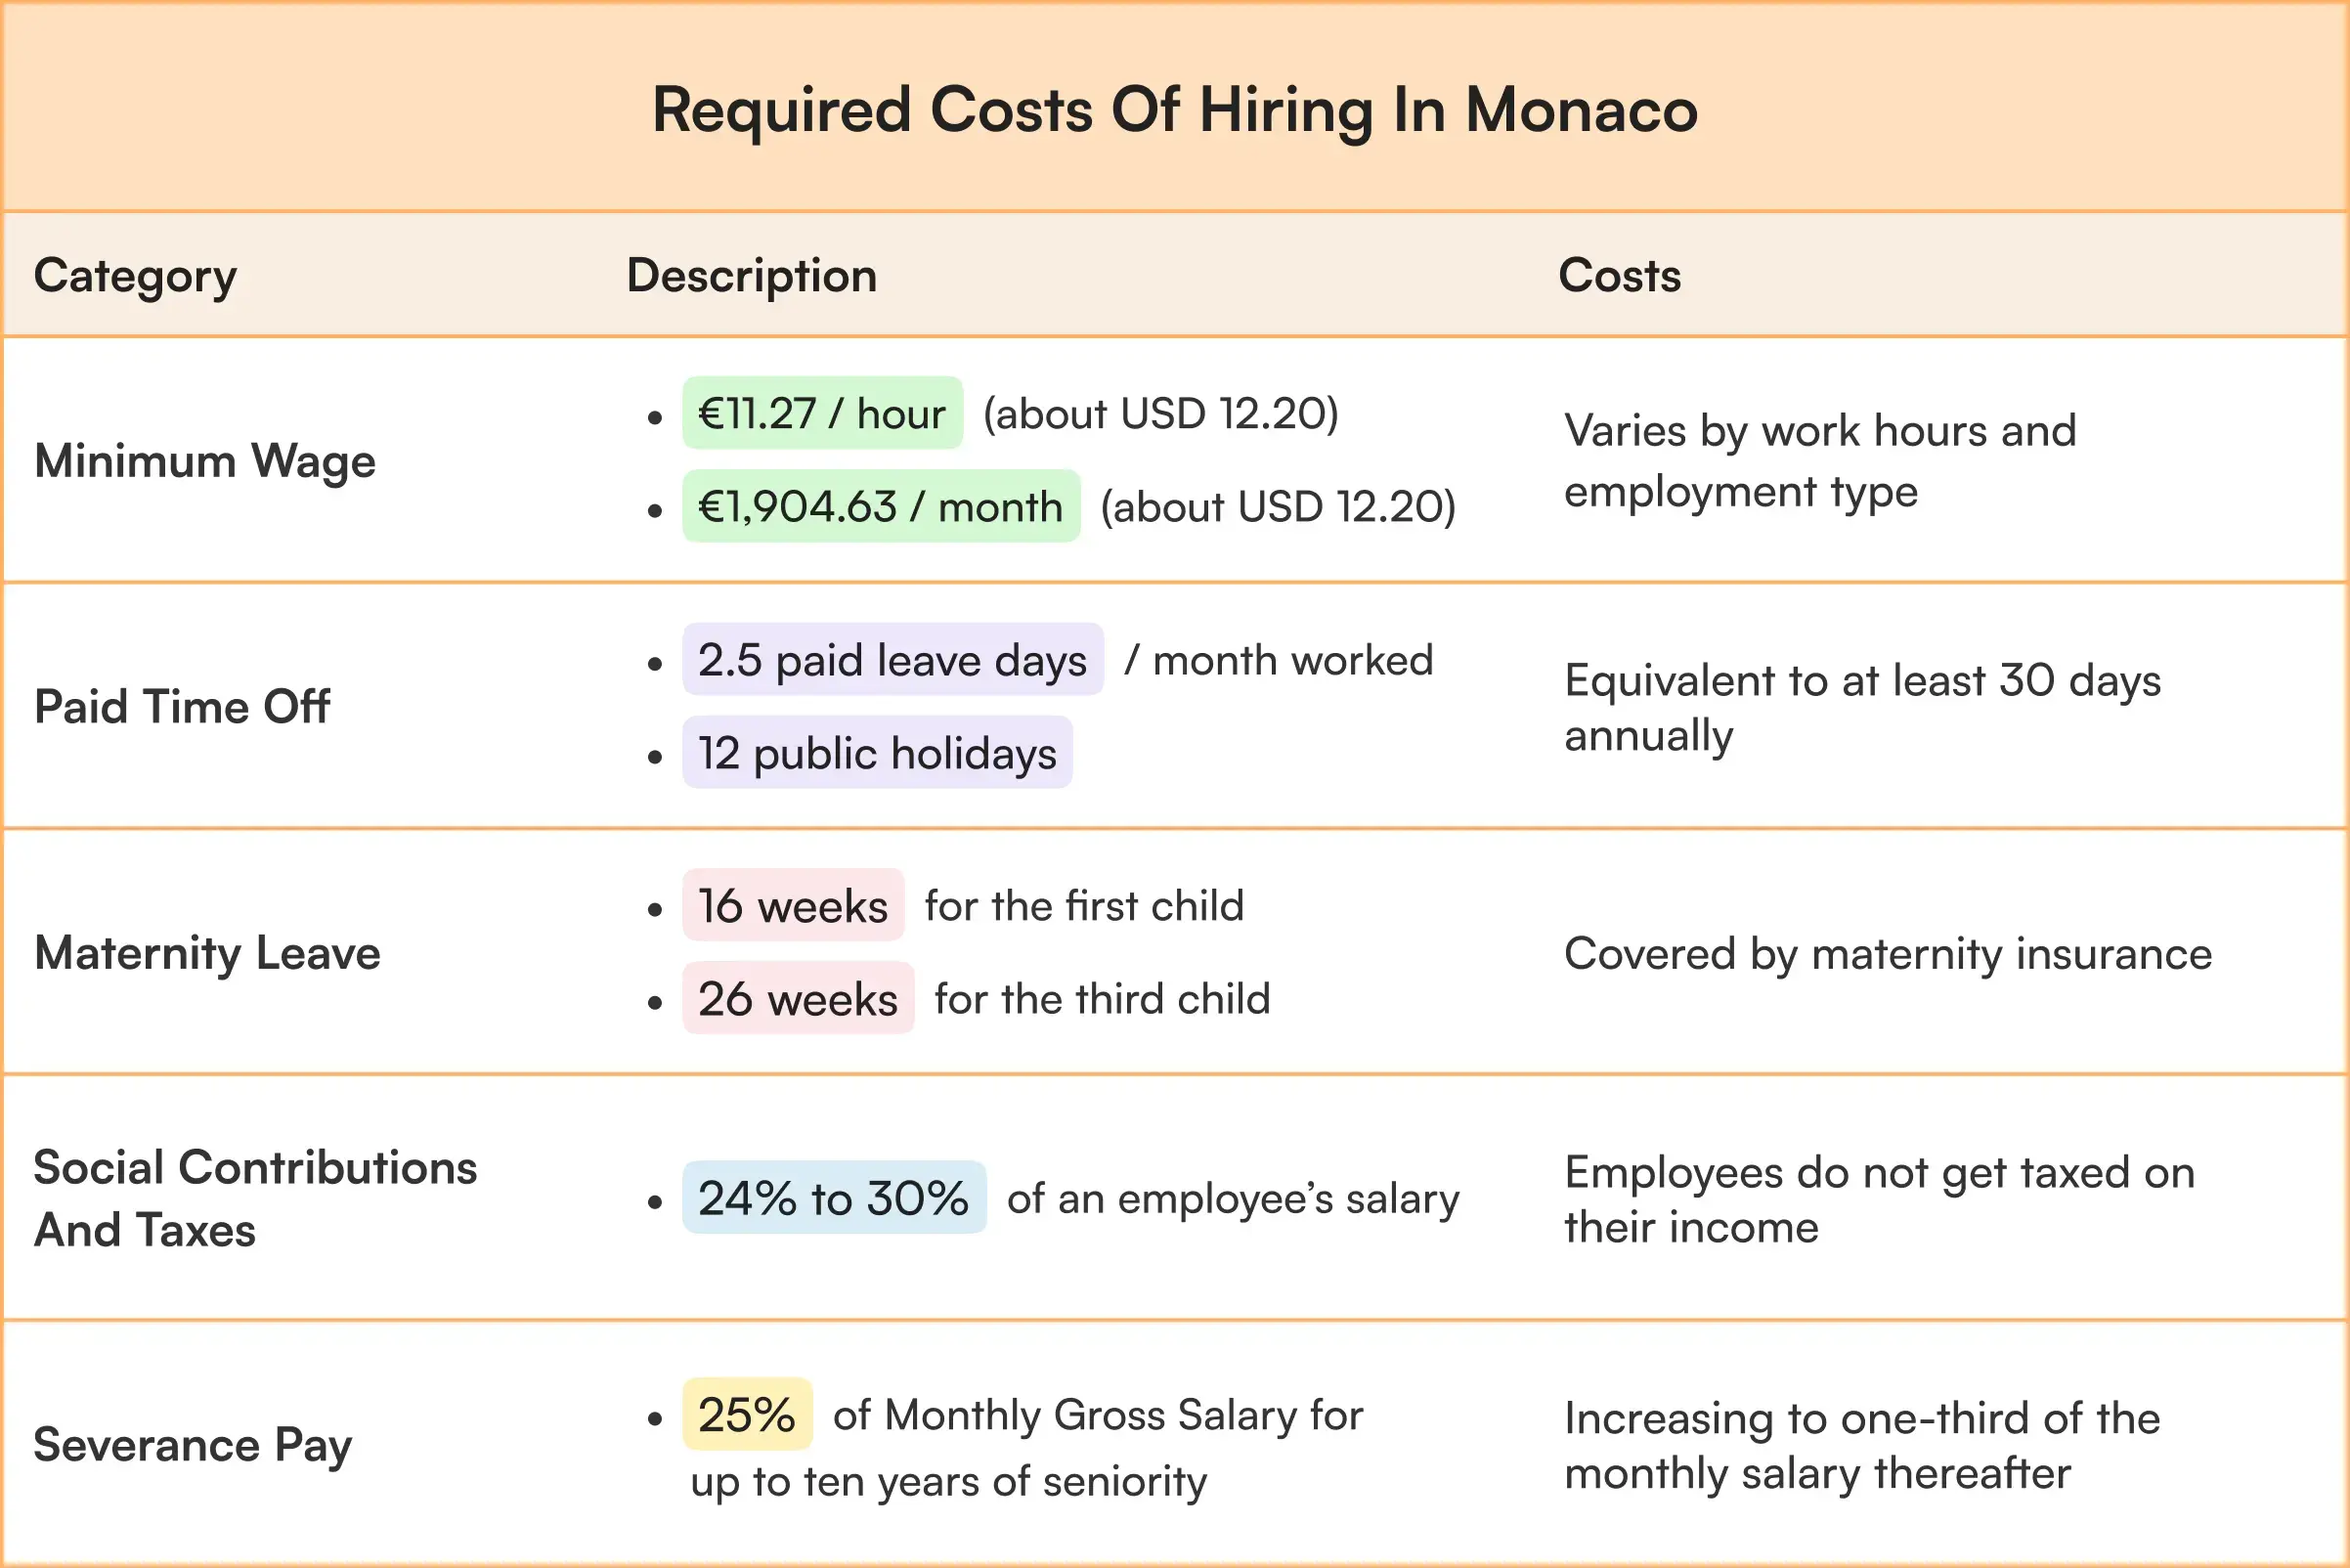 Required costs of hiring in Monaco